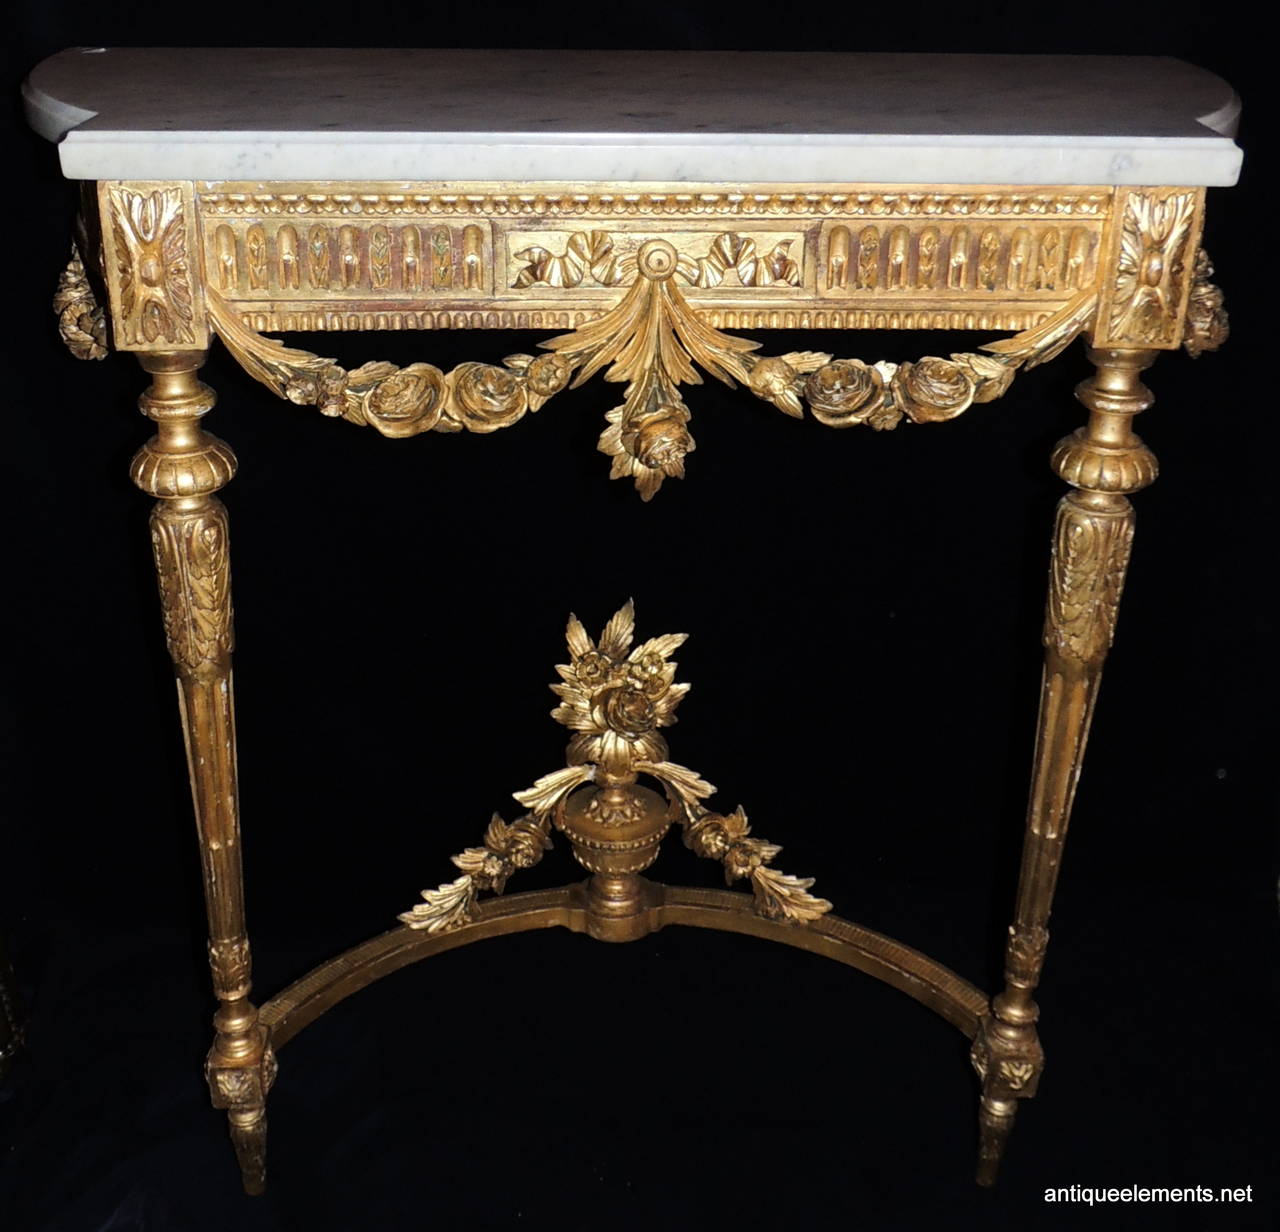 Pair of beautifully carved gilt wood consoles with shaped white marble with very light gray throughout. The carved center is richly detailed with large floral atop an
urn and floral draping to either side.  Throughout all 4 legs the floral and